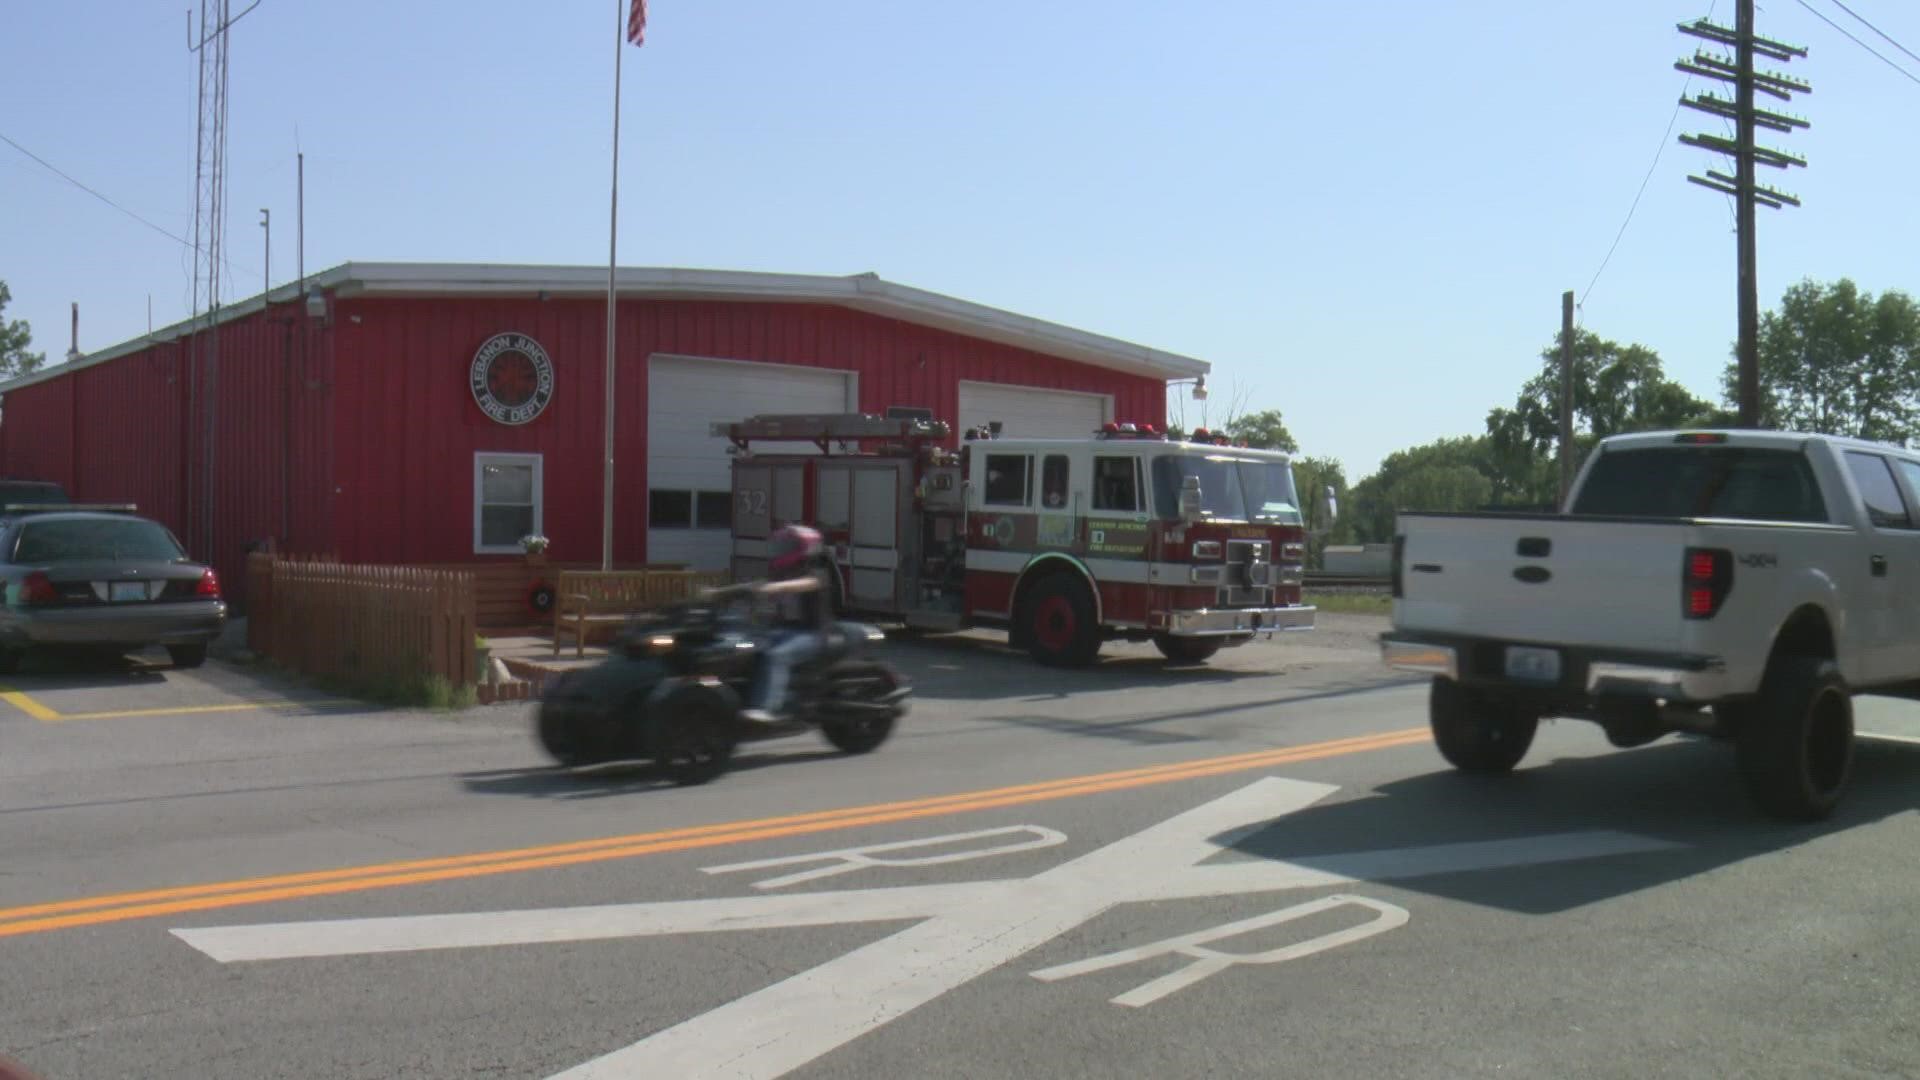 . In July, 15 firefighters resigned from the Lebanon Junction Volunteer Fire Department.